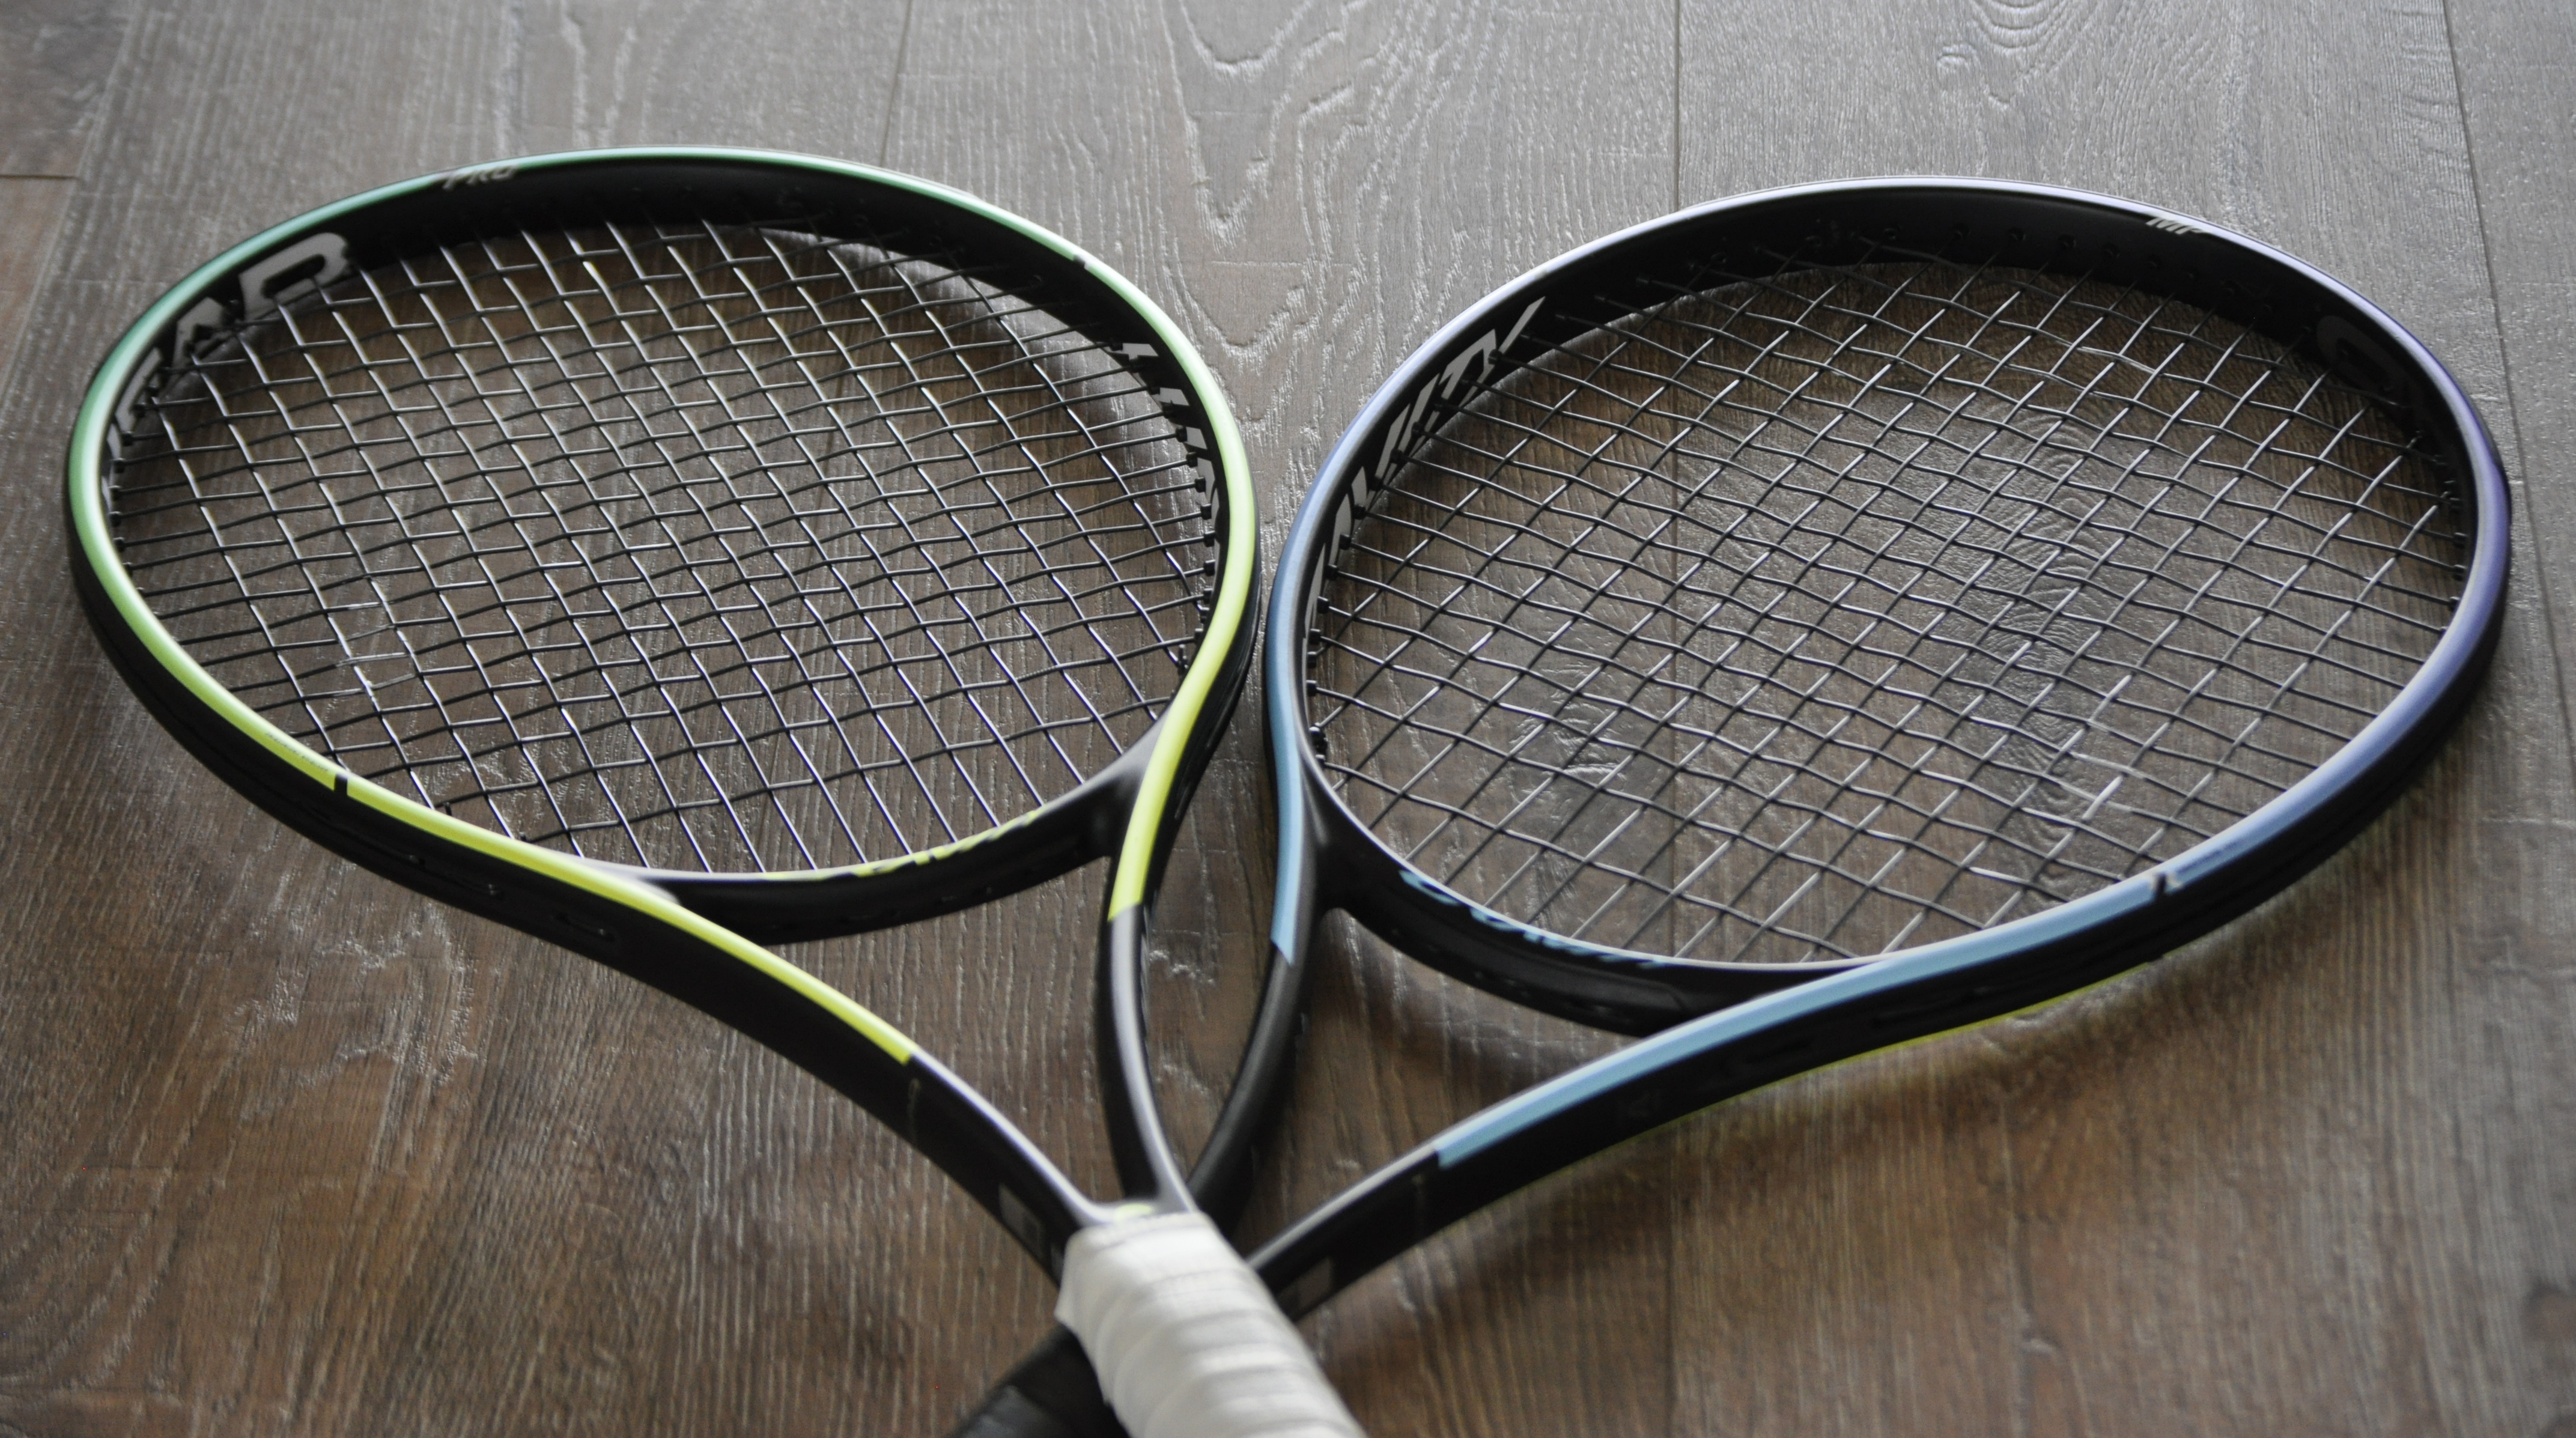 Head Gravity Pro & MP 2021 Racquet Review – Anything new 